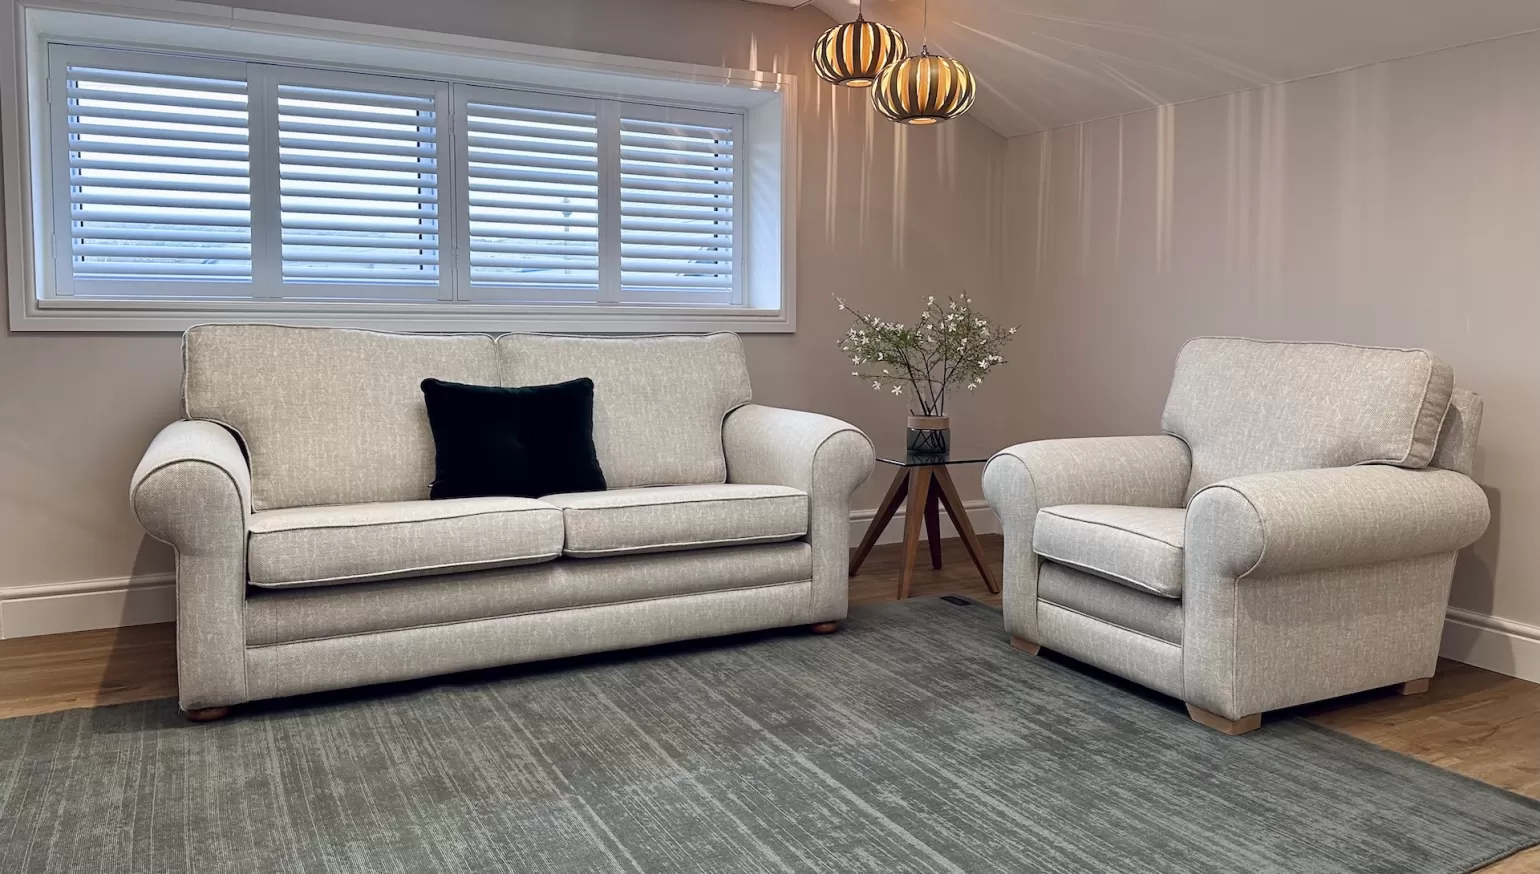 A very comfortable classic style range of furniture. A choice of arm finishes means this model can be upholstered to your own personal taste. 

The comfort offered from the Chatsworth range is an inviting cosy seat, with a high back cushion.
